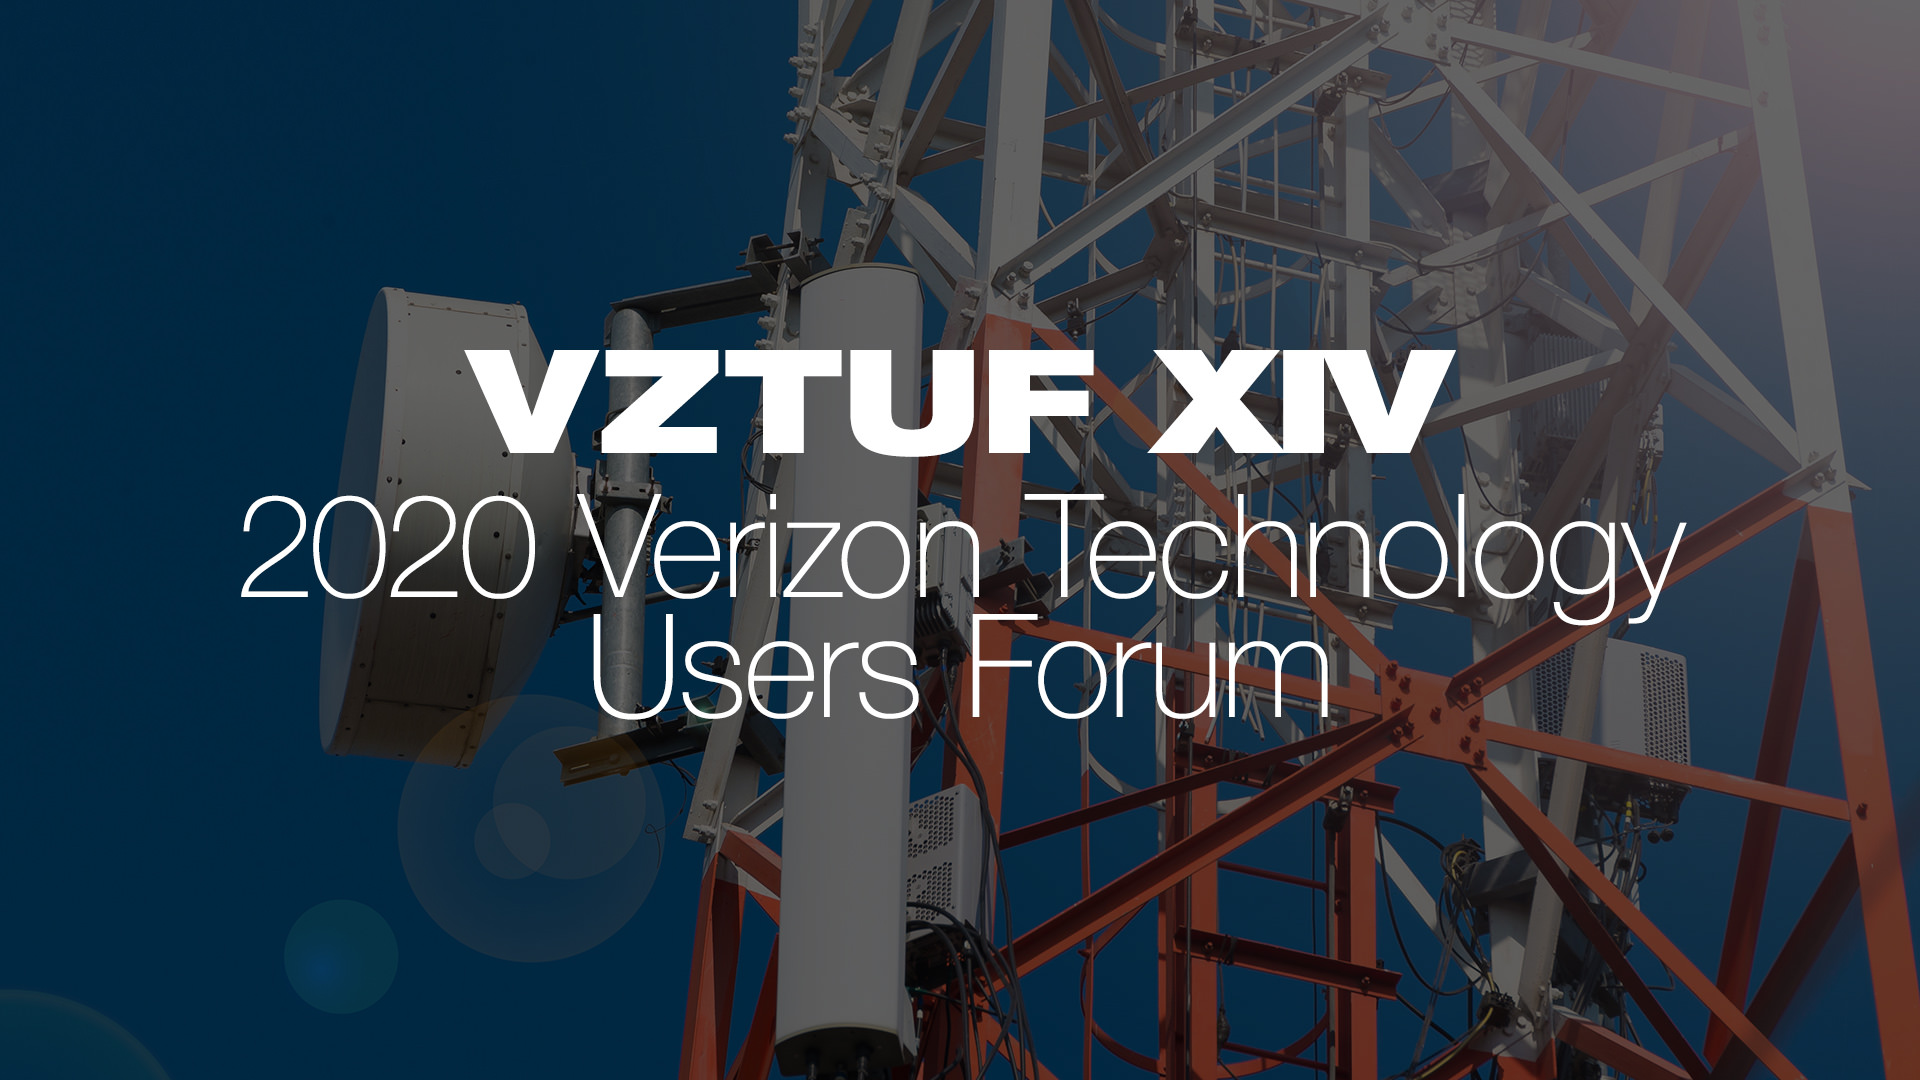 Featured image for “VZTUF XIV 2020 Verizon Technology Users Forum”